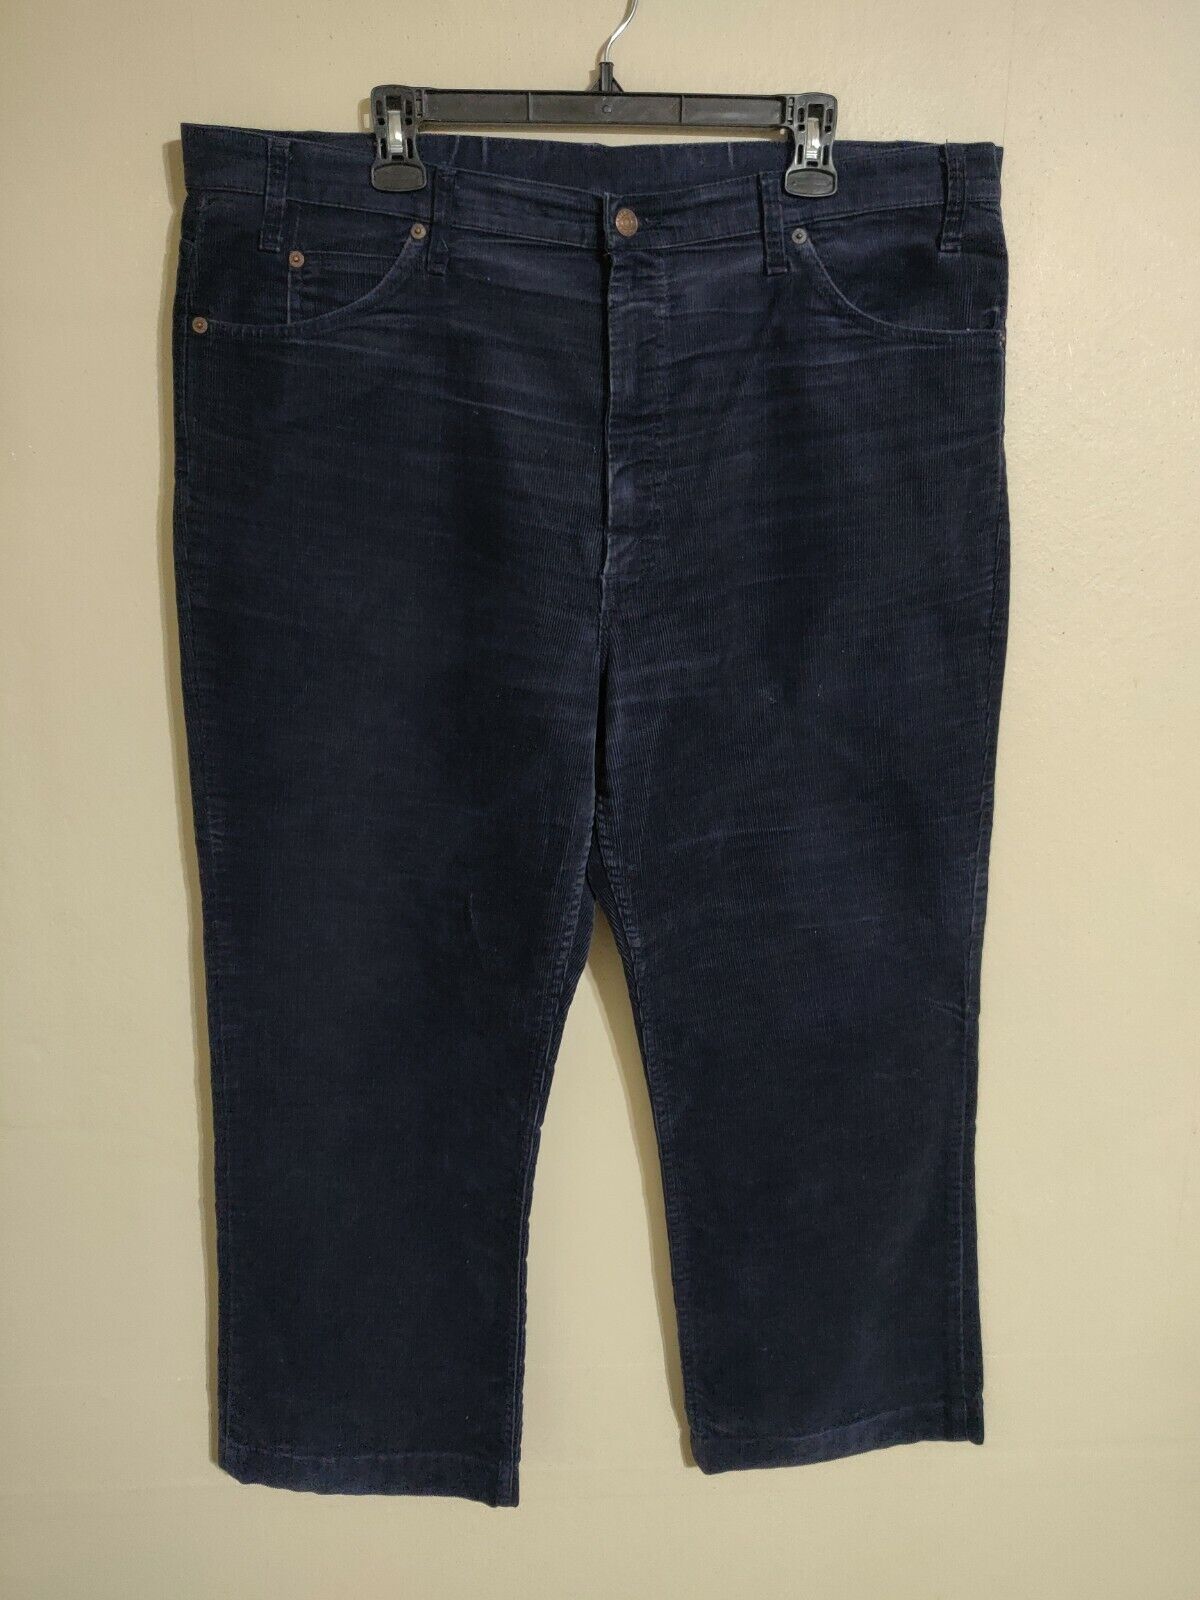 Vintage Levi's 517 1517 Made in USA Navy Blue Corduroy Pants 